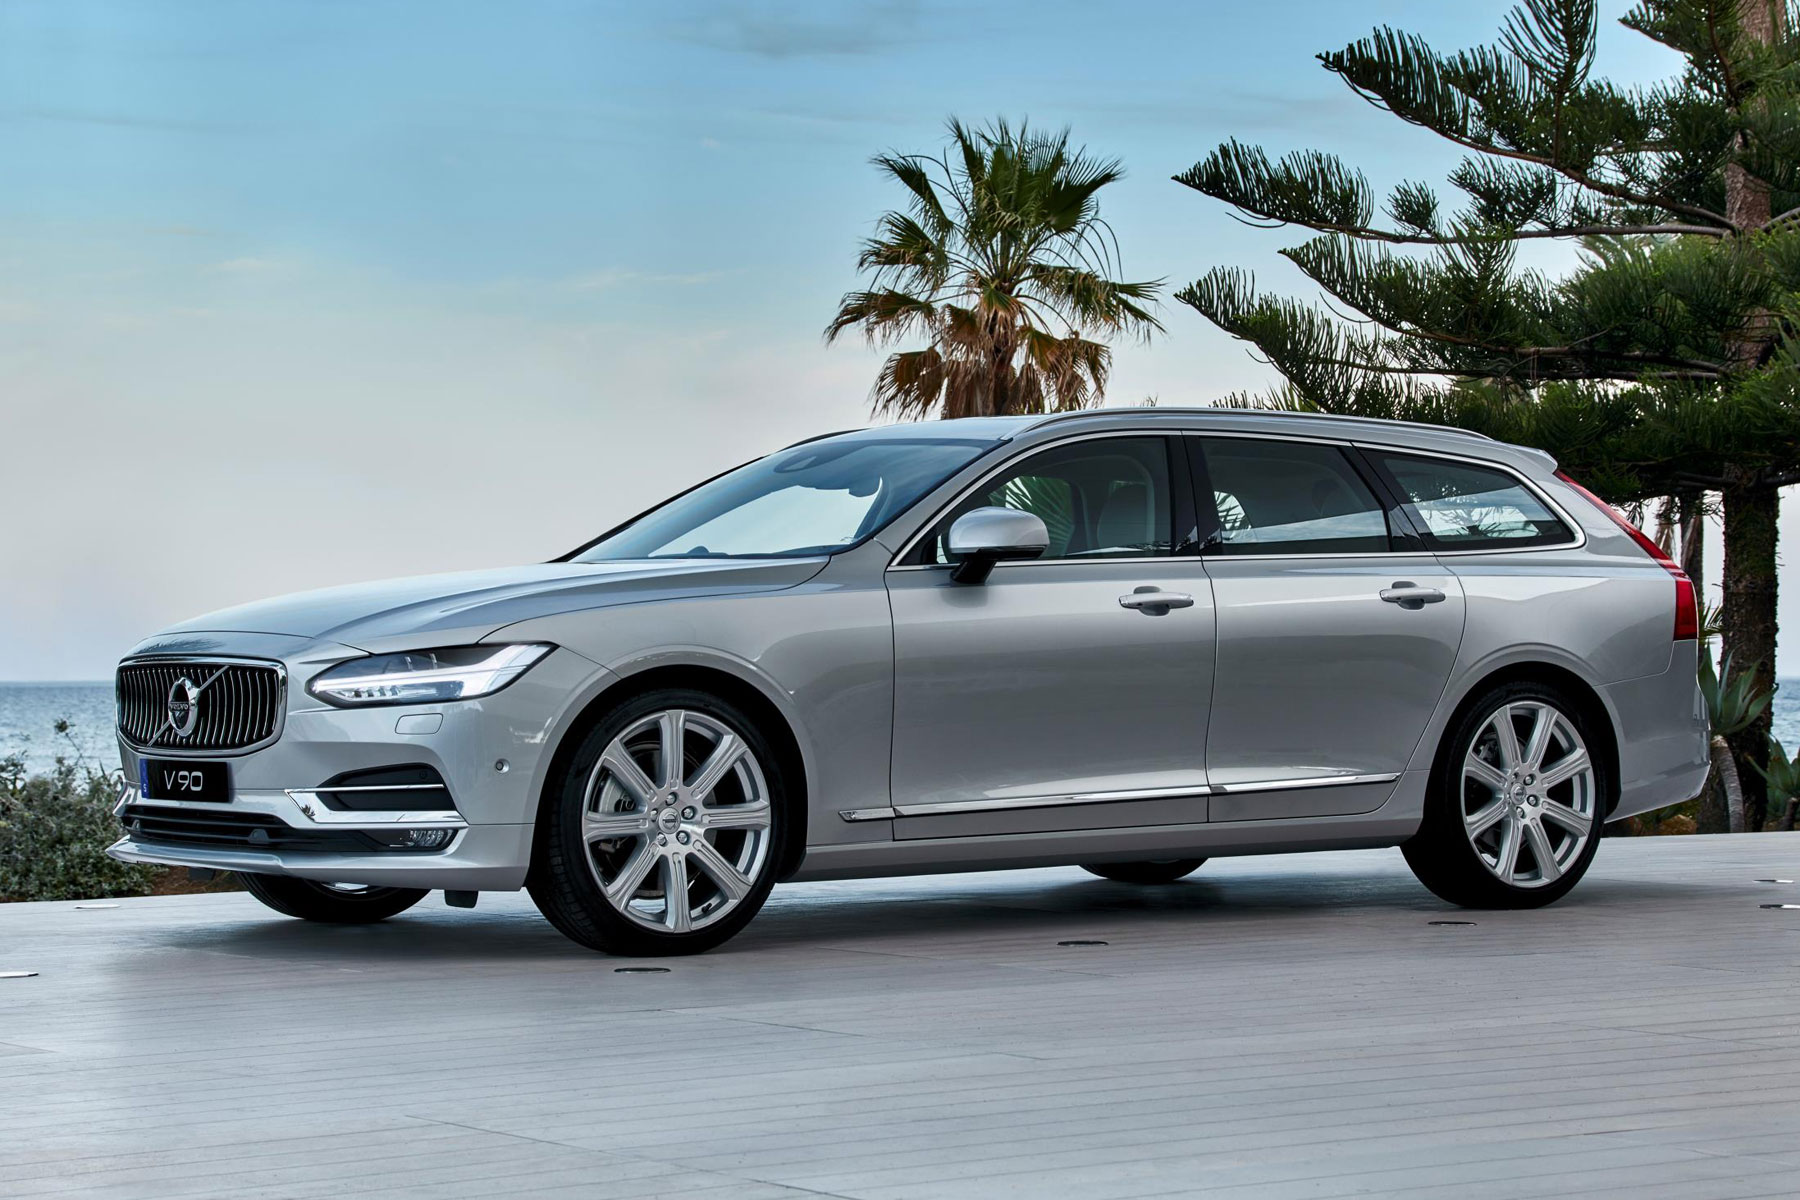 Volvo V90 Inscription: is there a better looking wagon on sale new in ...